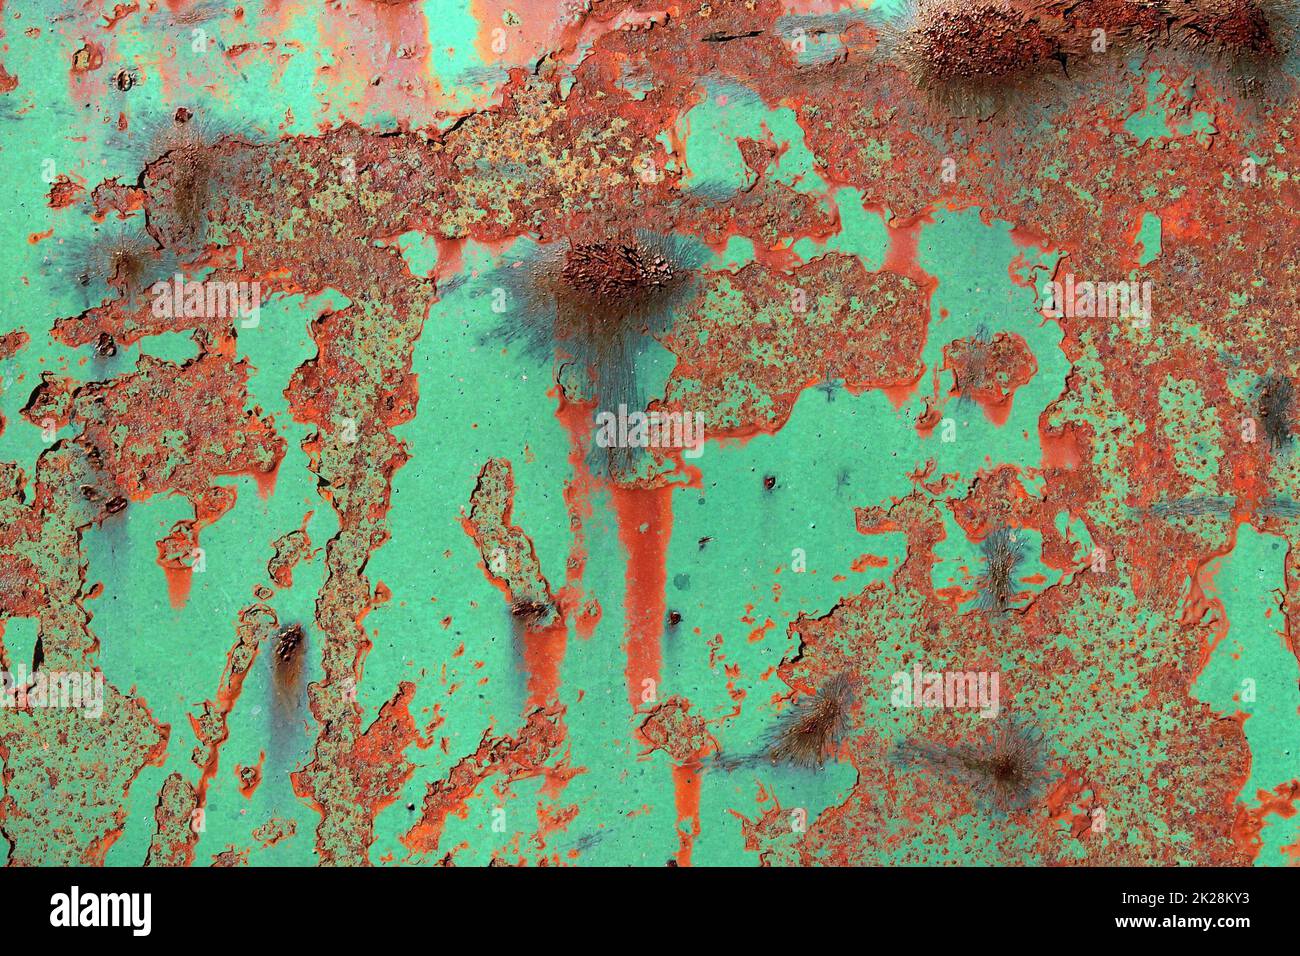 Detailed close up surface of rusty metal and steel with lots of corrosion in high resolution Stock Photo